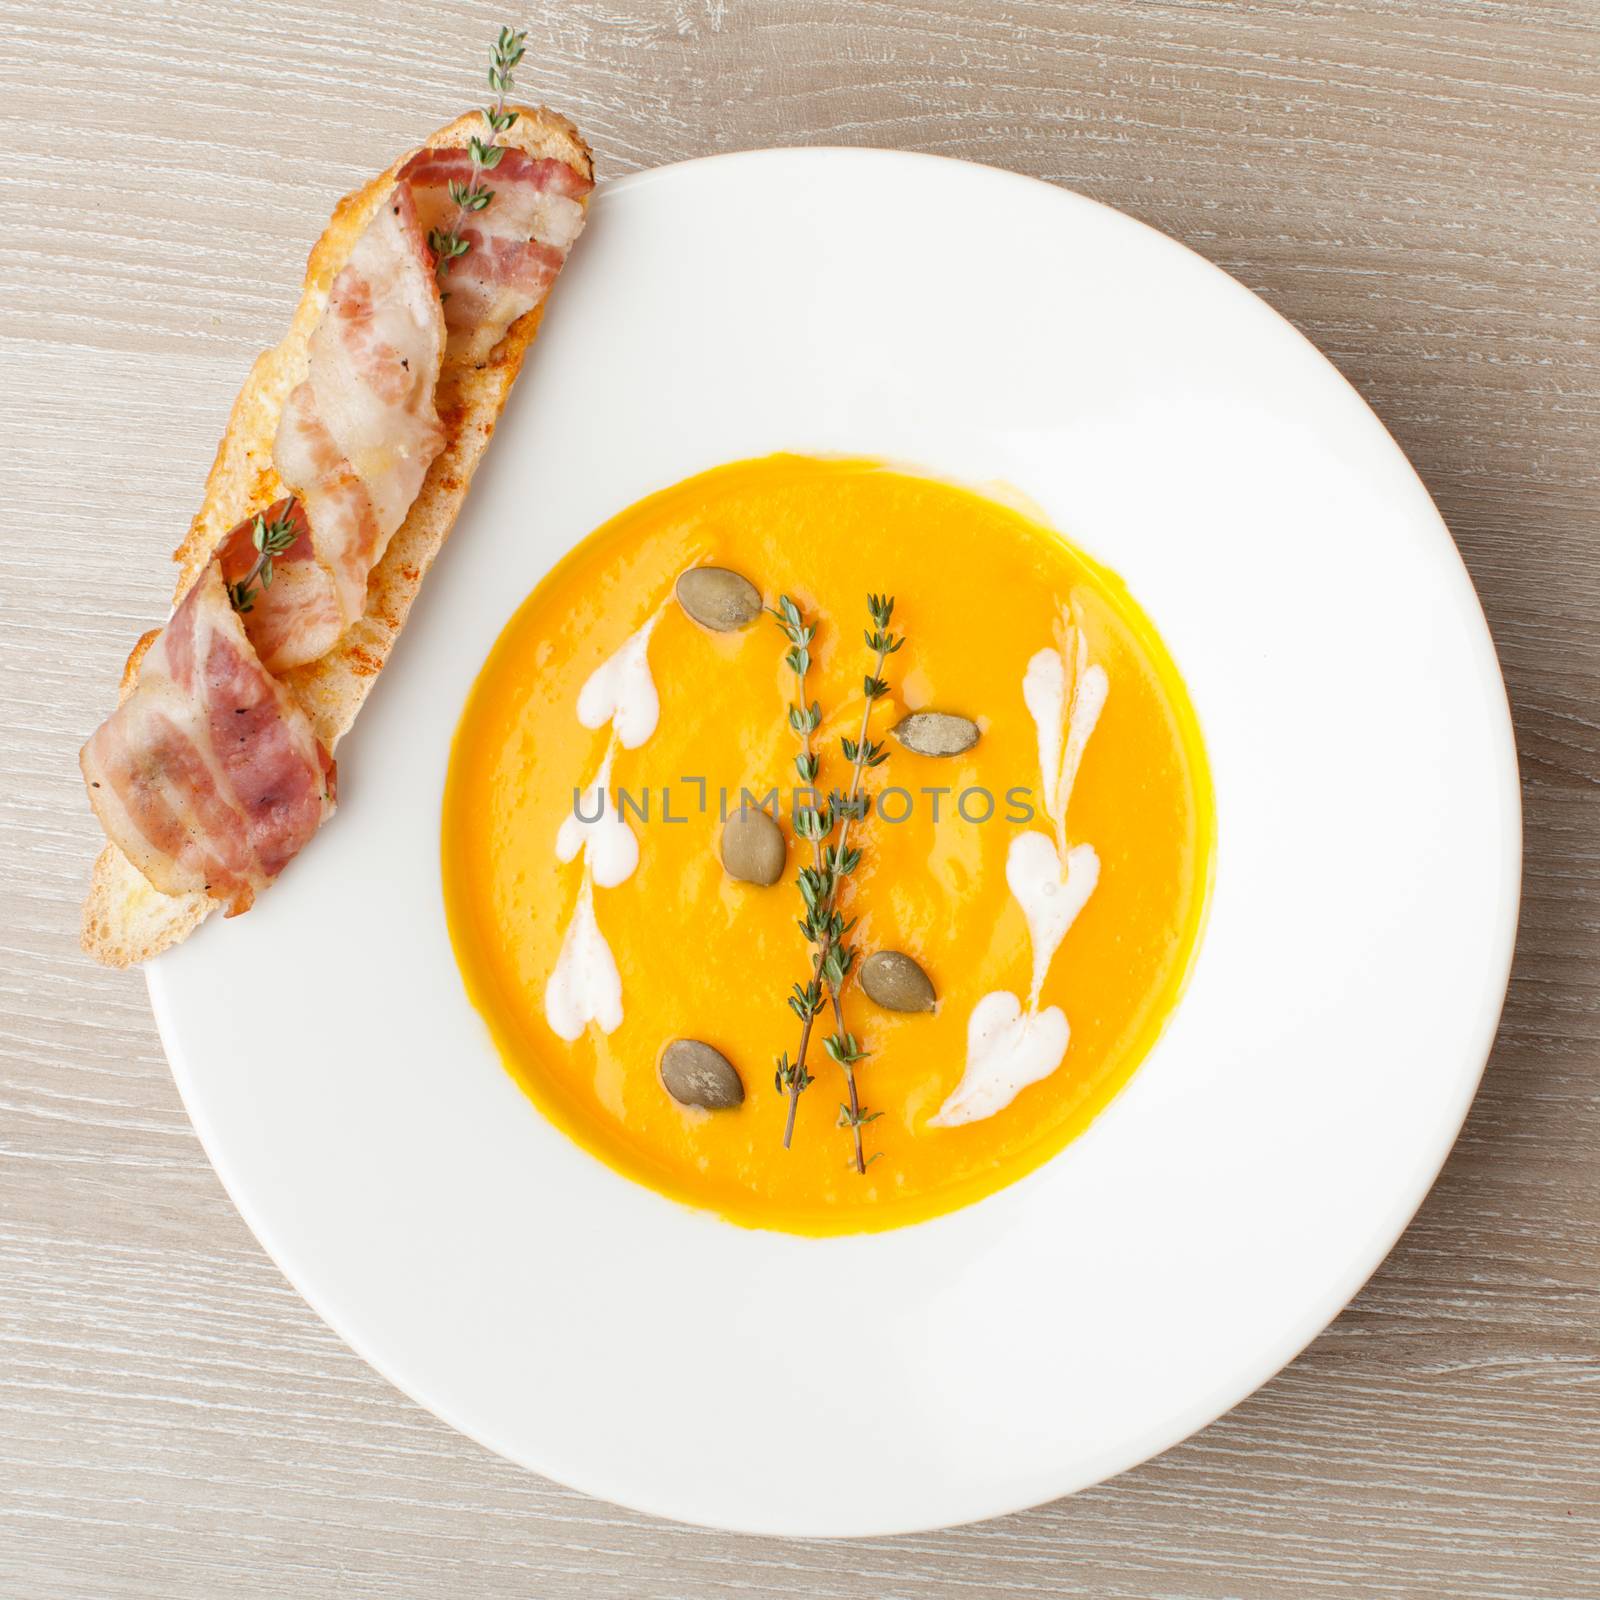 Pumpkin cream soup puree with bread slice, bacon and seeds by SergeyAK